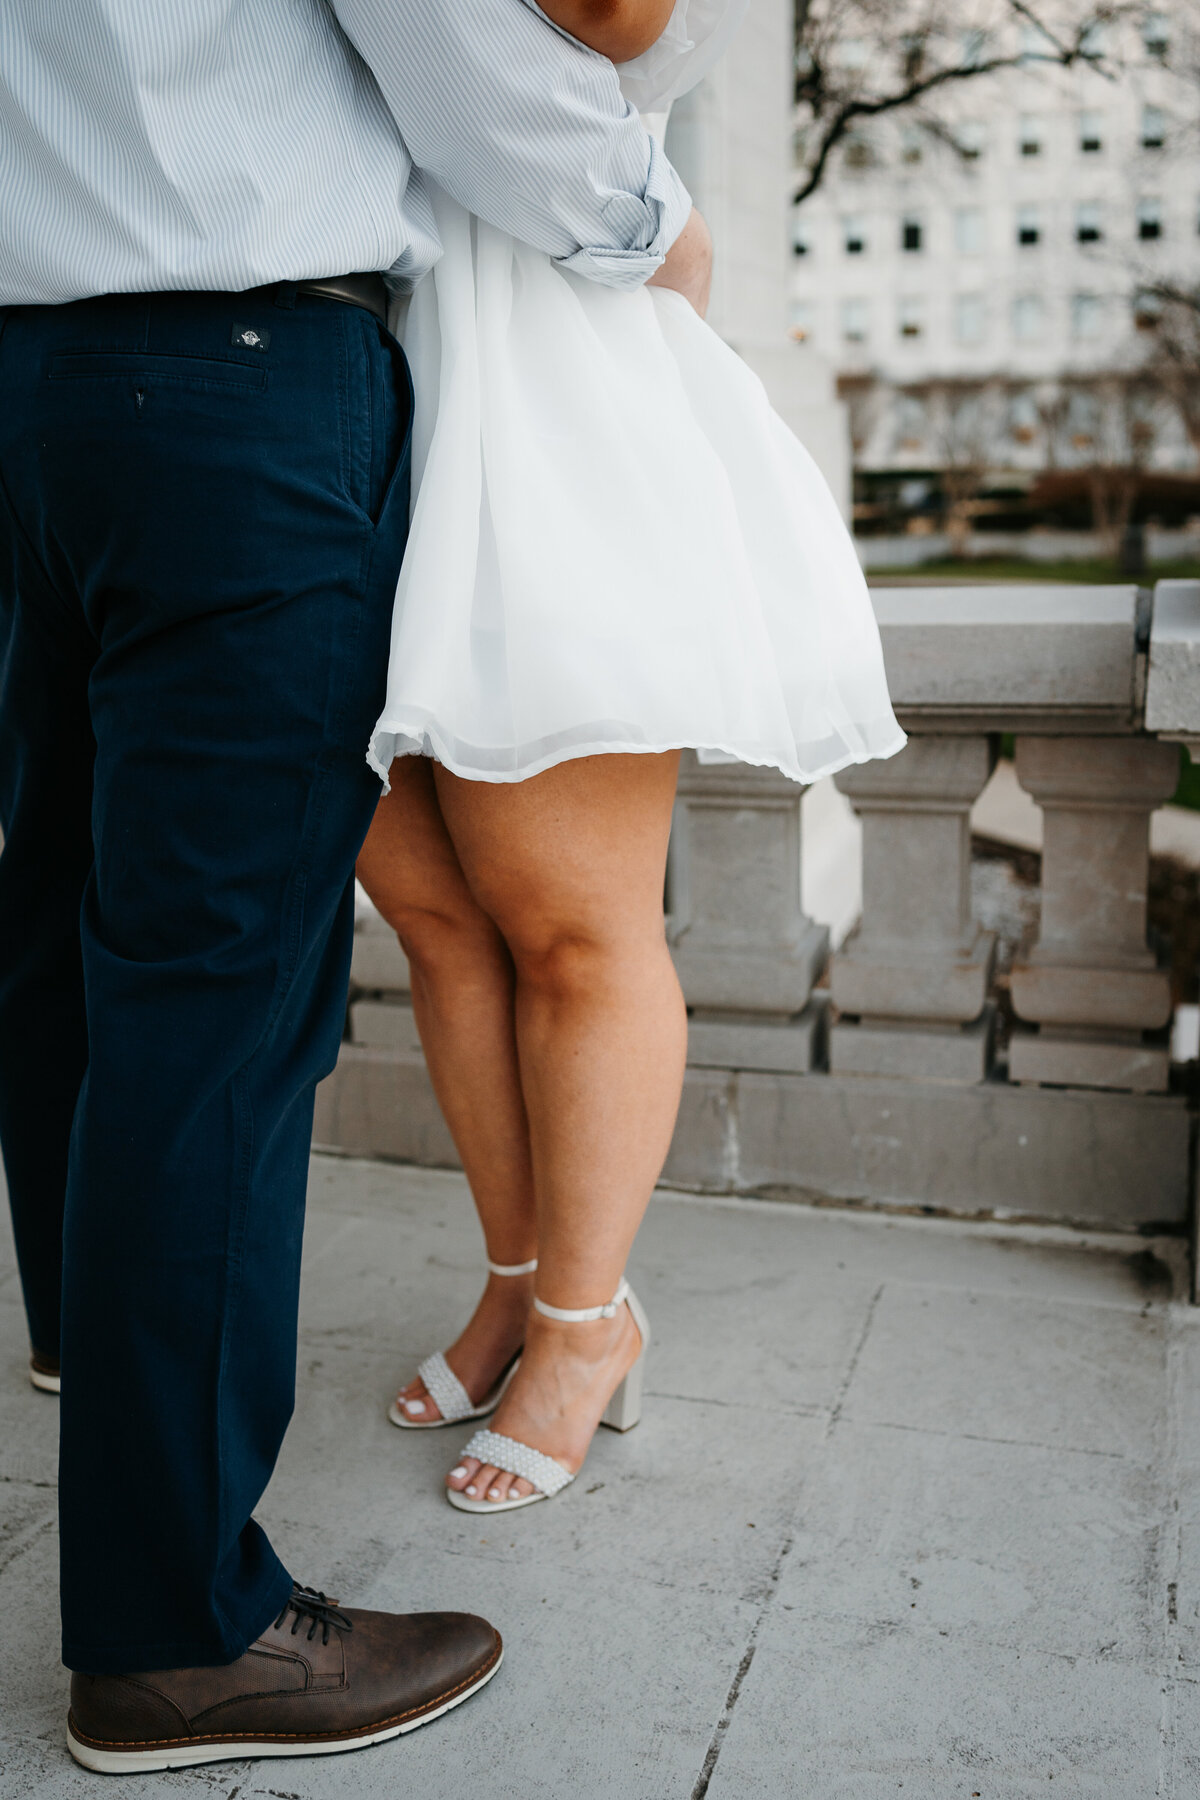 chattanooga-downtown-engagement- Kristen Thomison Photography-87